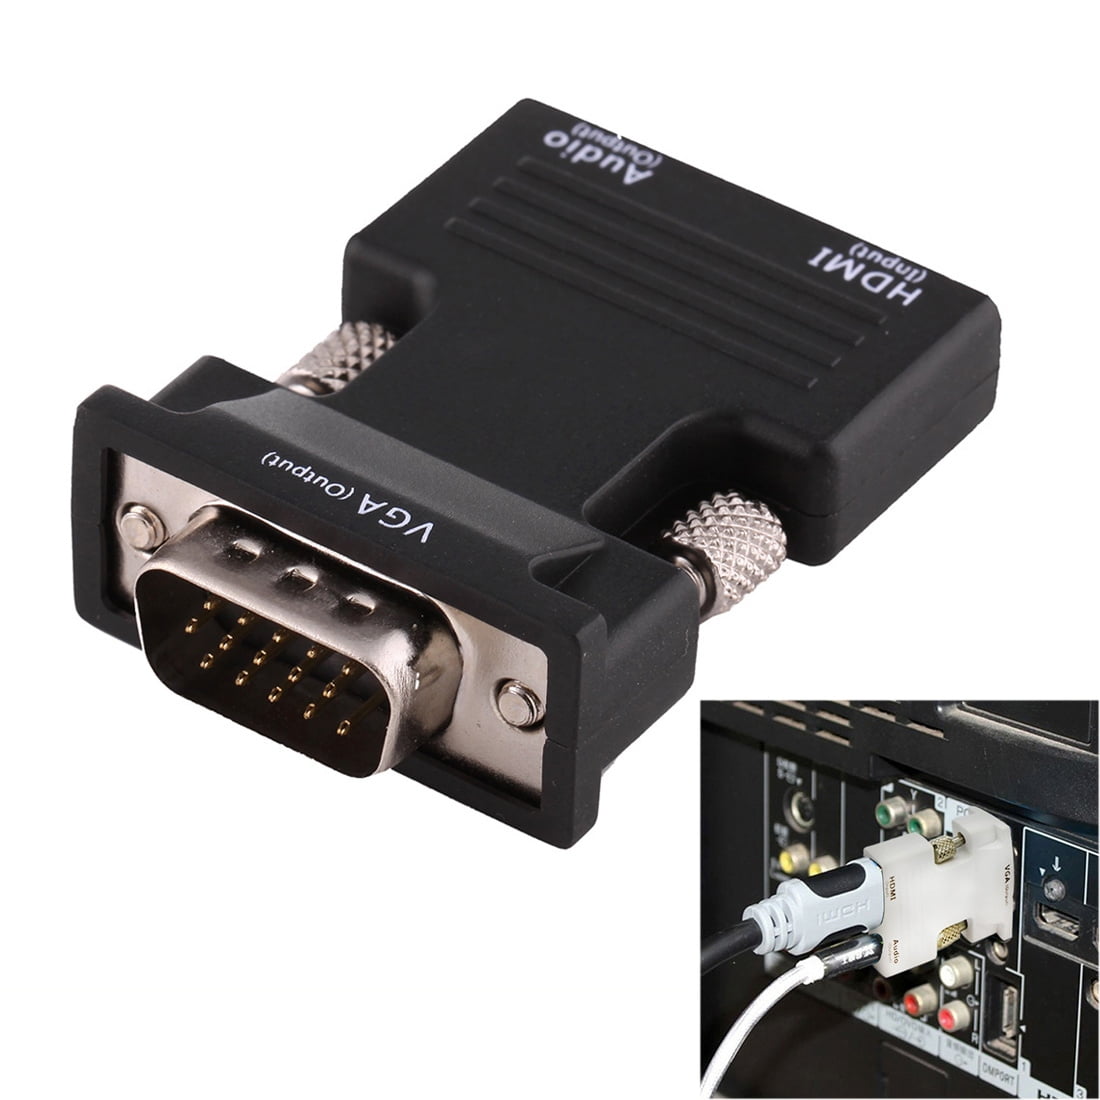 Amzer Hdmi Female To Vga Male Converter With Audio Output Adapter For